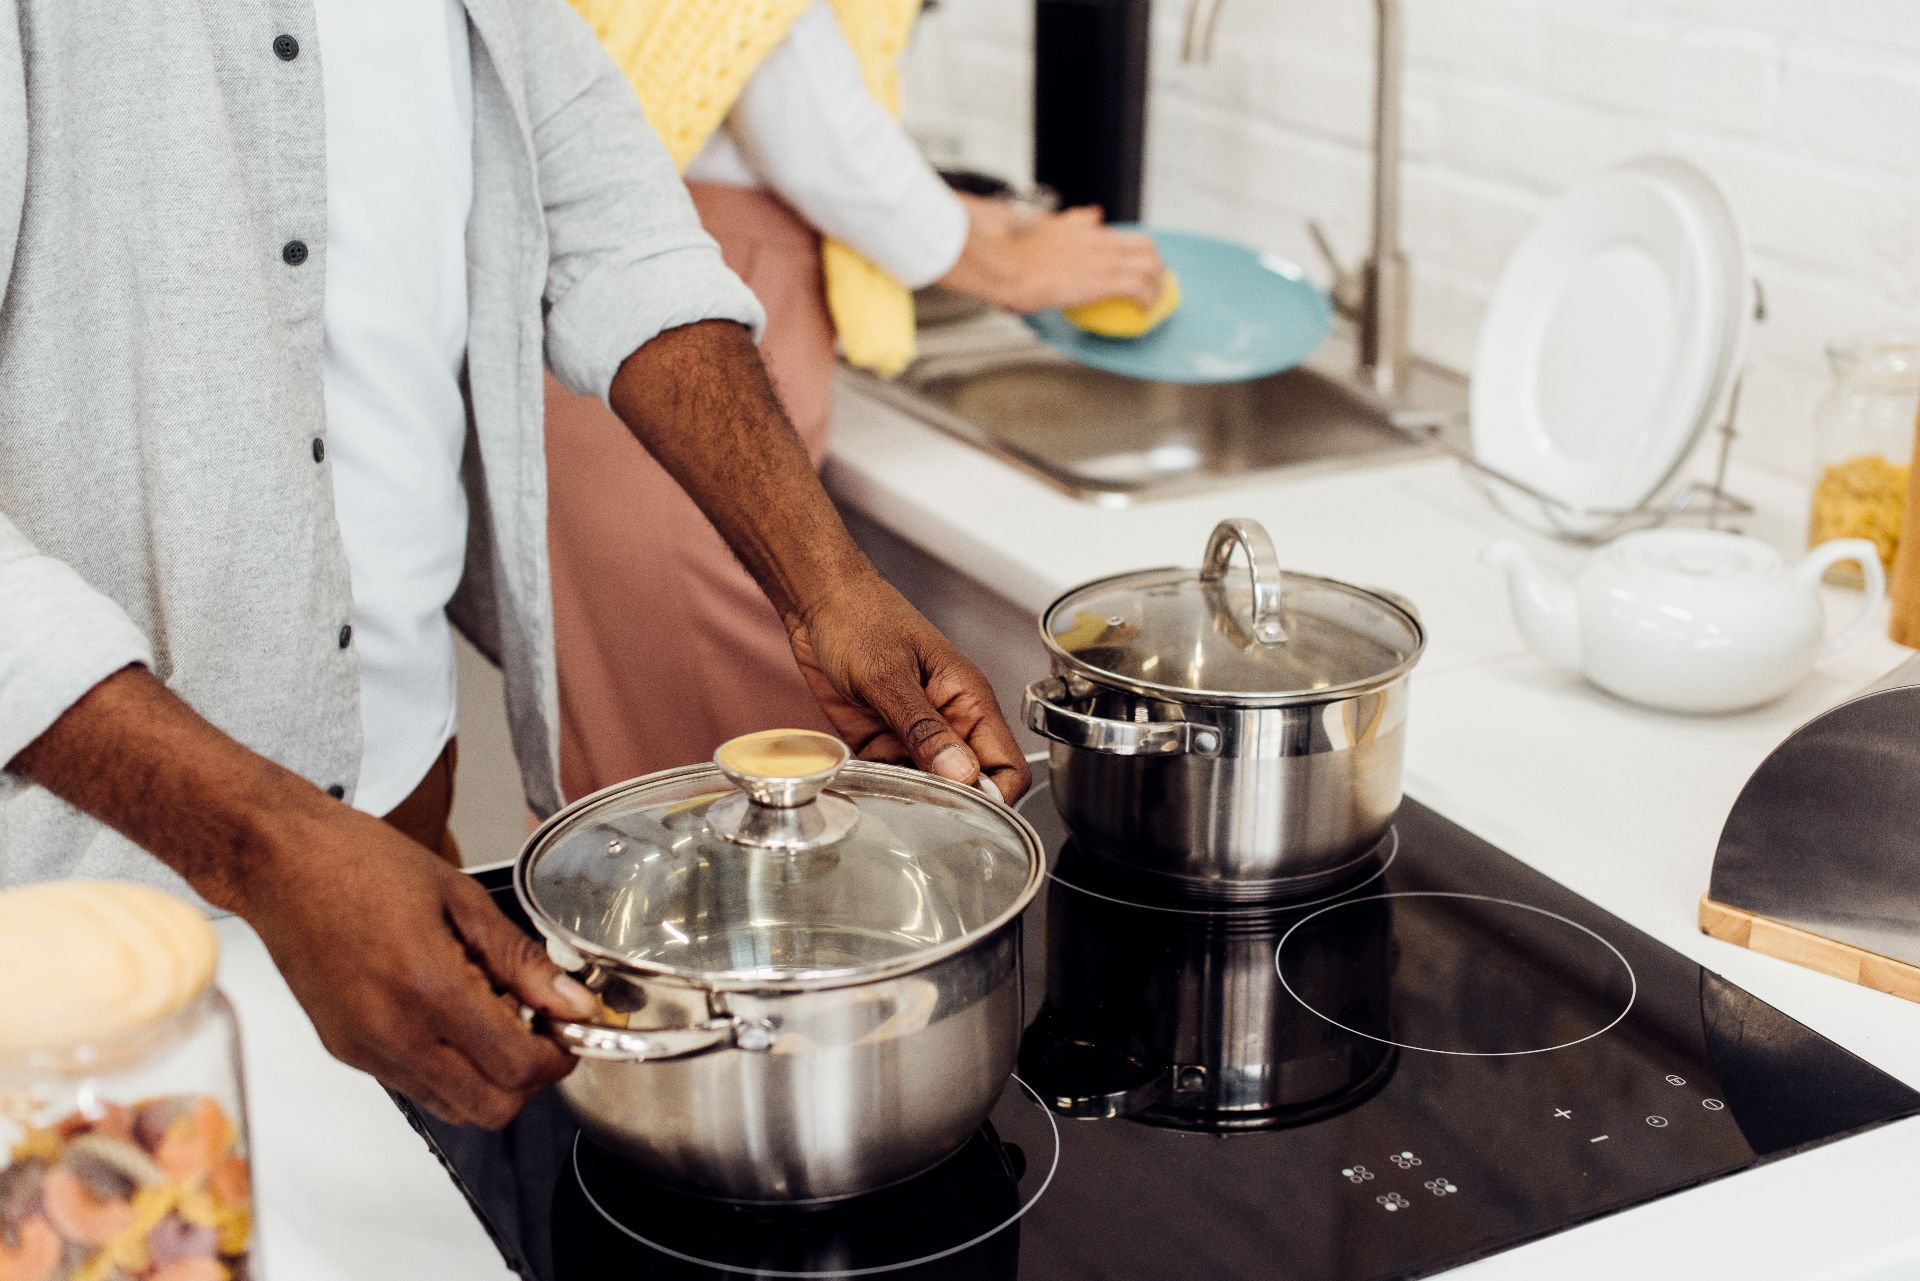 Man handles stainless steel pot on stove as woman washes dishes in the background - All-Clad stainless steel